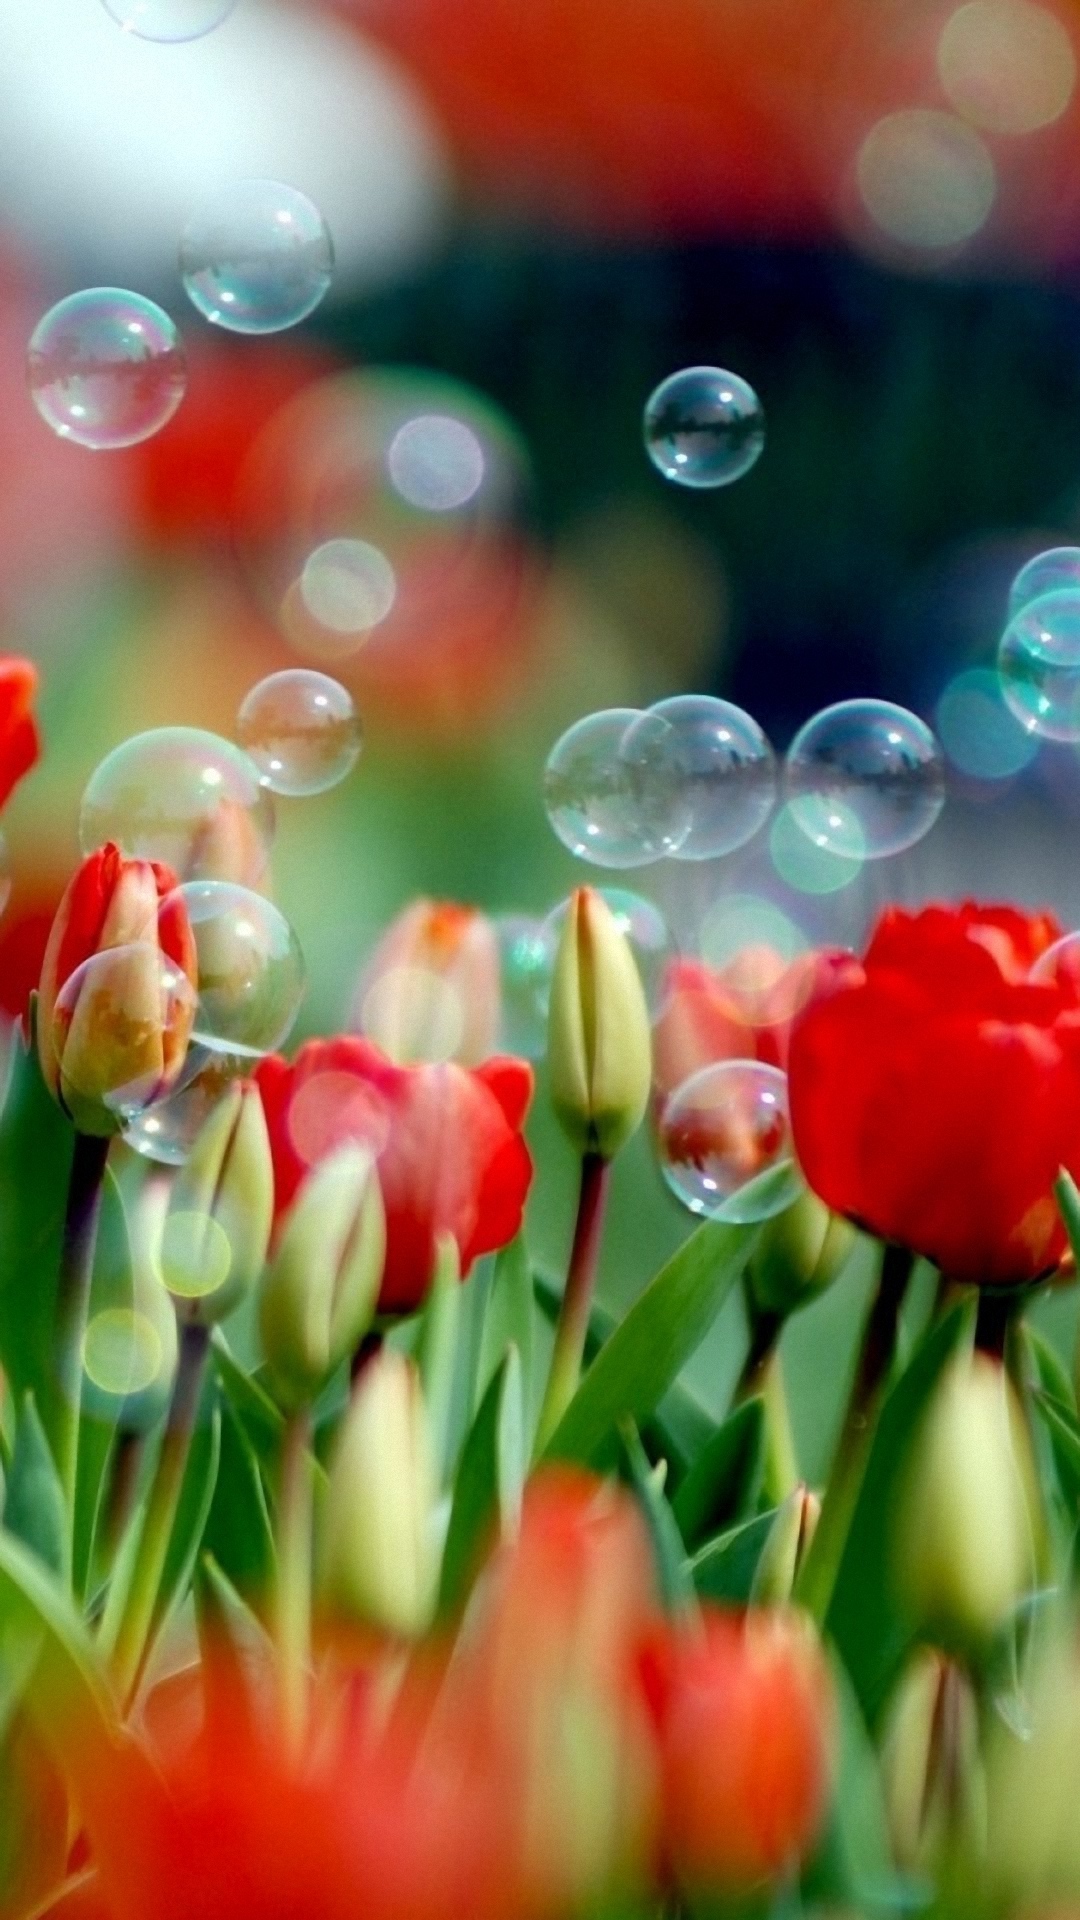 Tulips And Bubbles Wallpaper For Samsung Galaxy A7